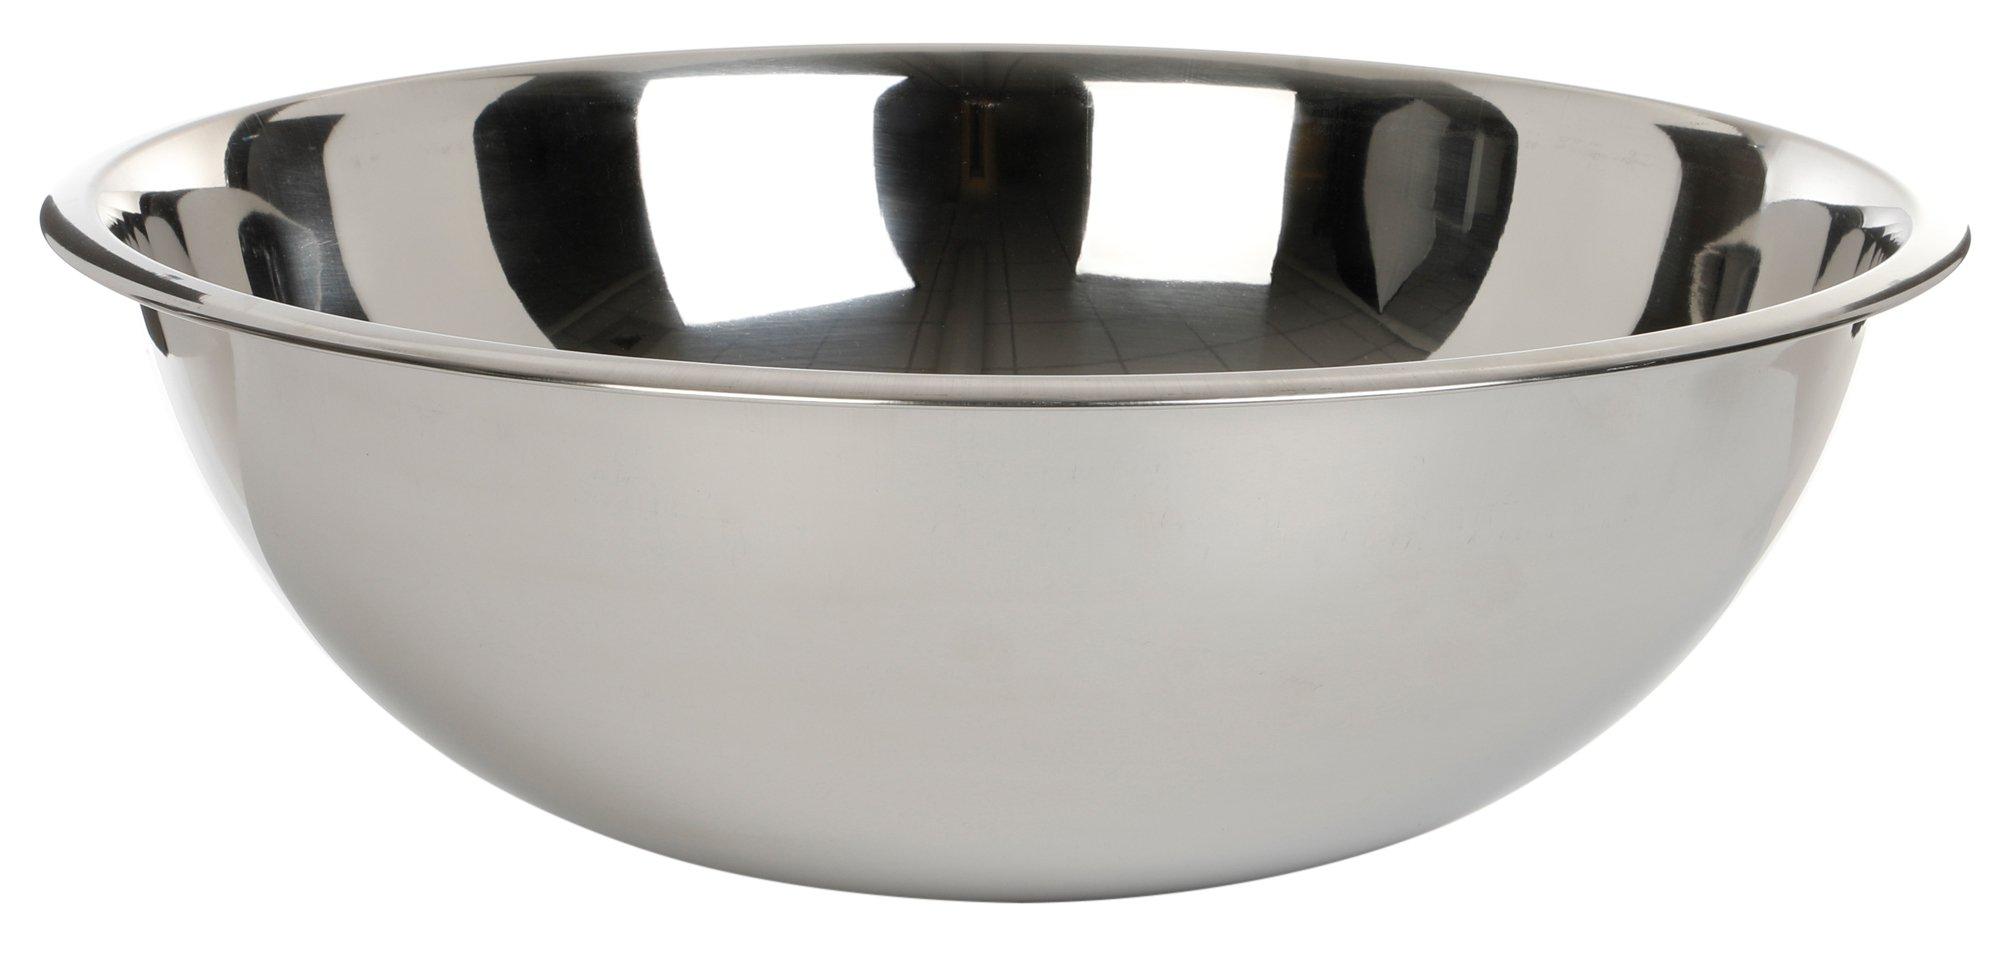 30 Quart Stainless Steel Mixing Bowl